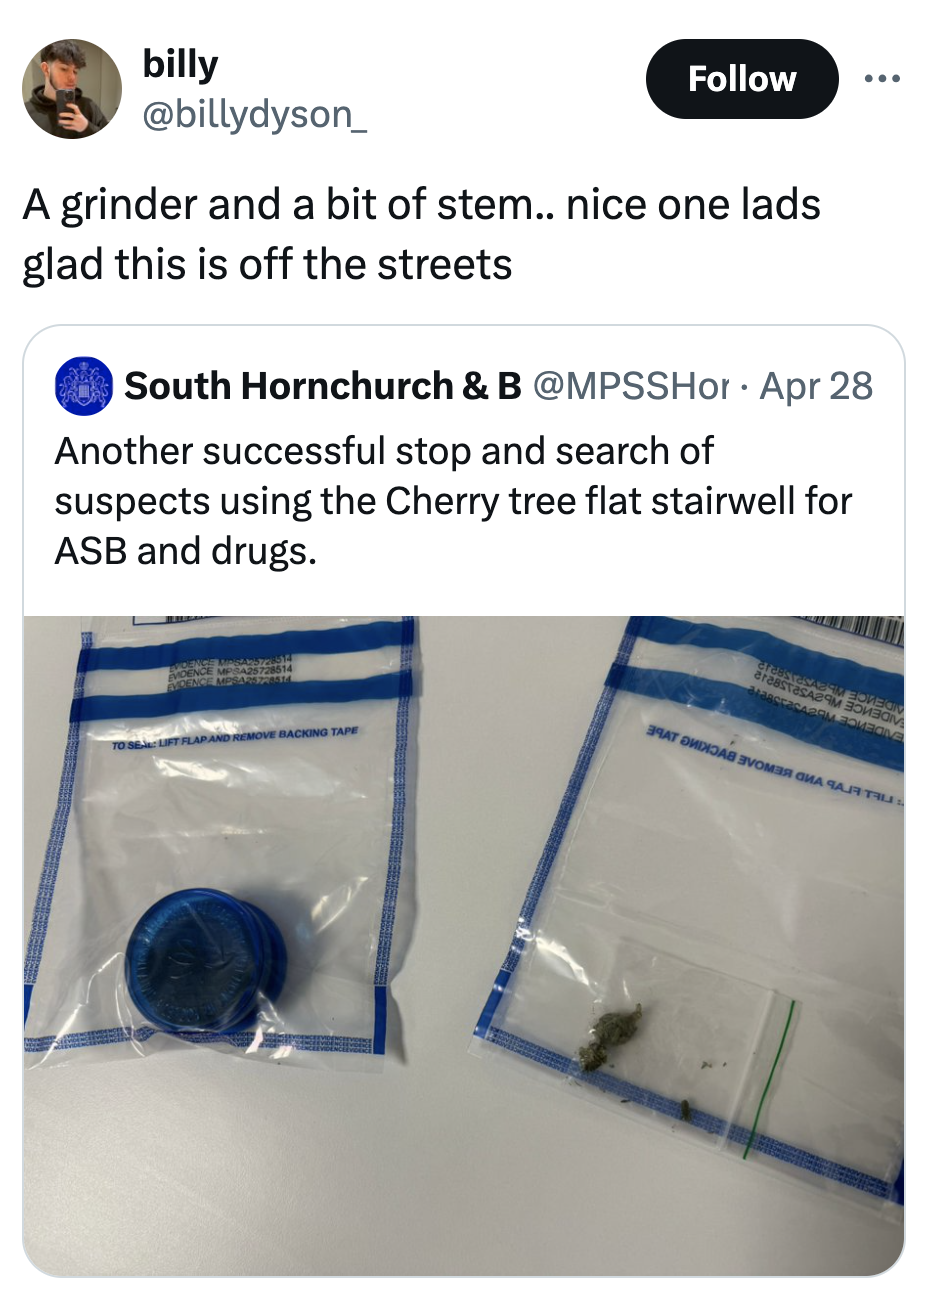 screenshot - billy A grinder and a bit of stem.. nice one lads glad this is off the streets South Hornchurch & B Apr 28 Another successful stop and search of suspects using the Cherry tree flat stairwell for Asb and drugs.